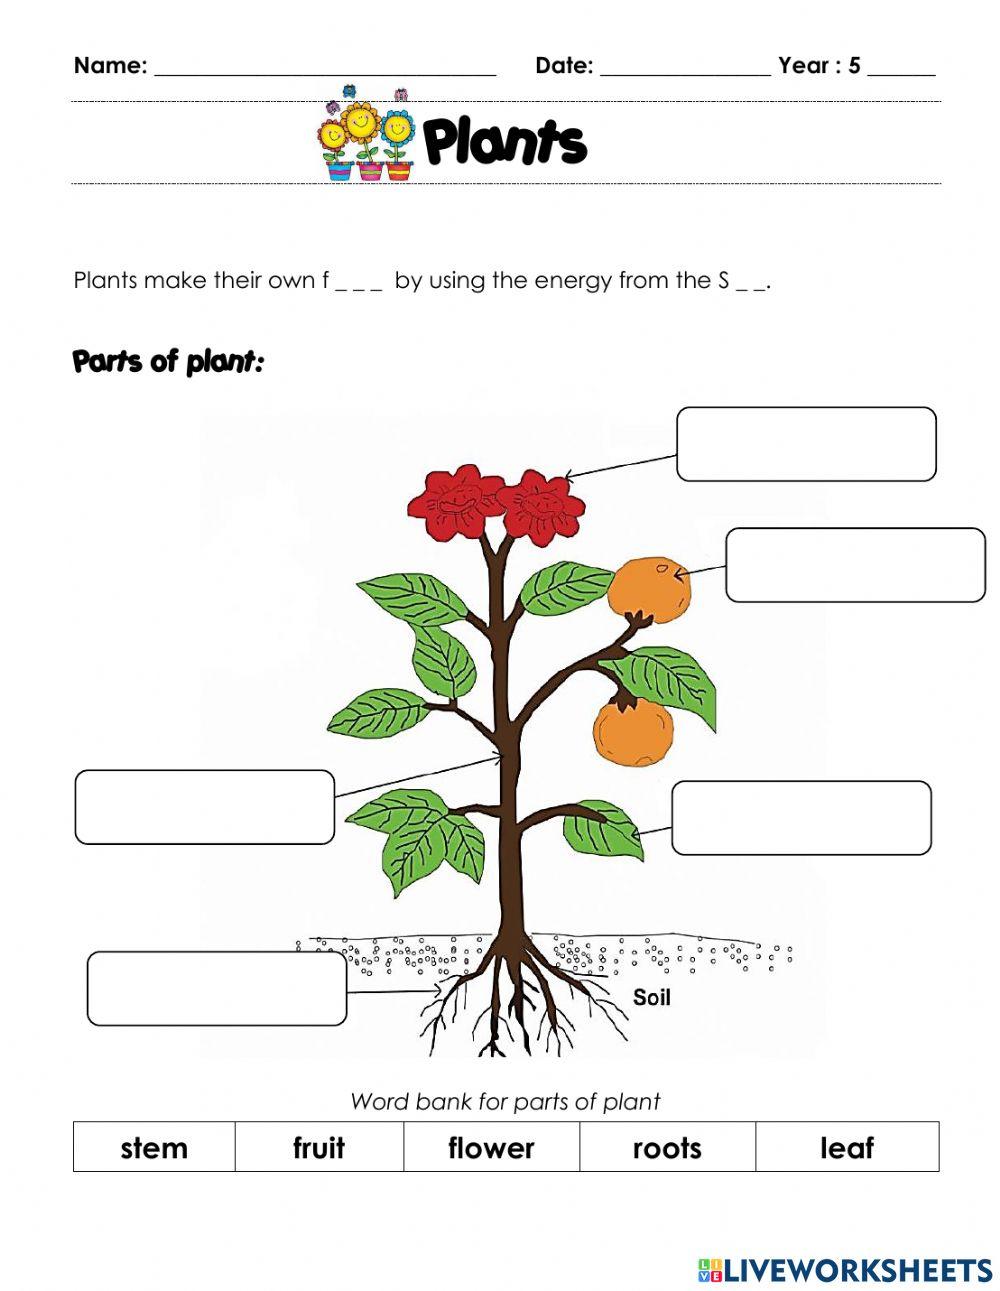 Plants and its functions.